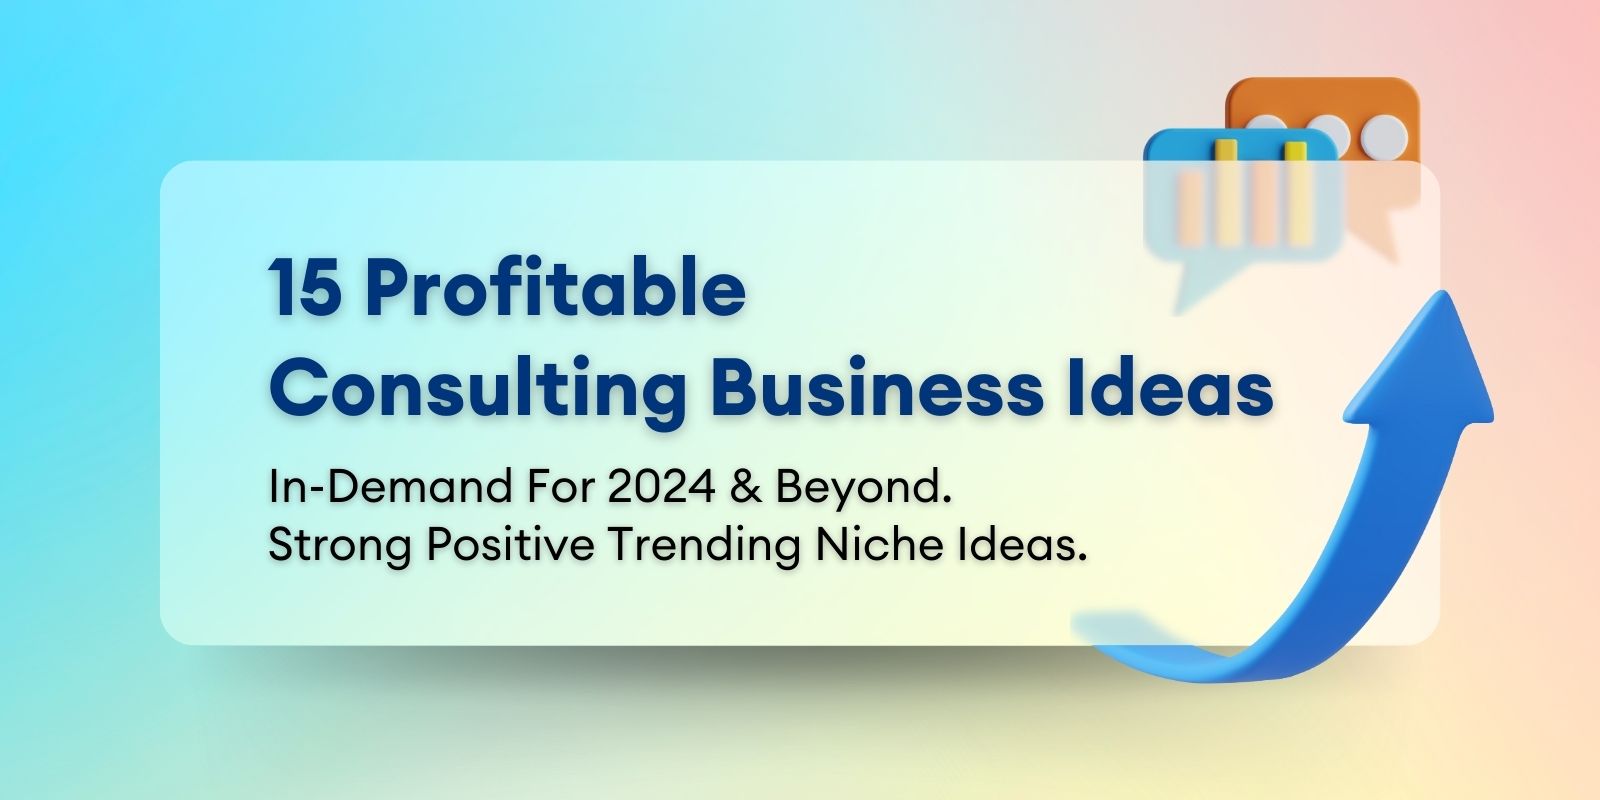 15 Profitable Consulting Business Ideas